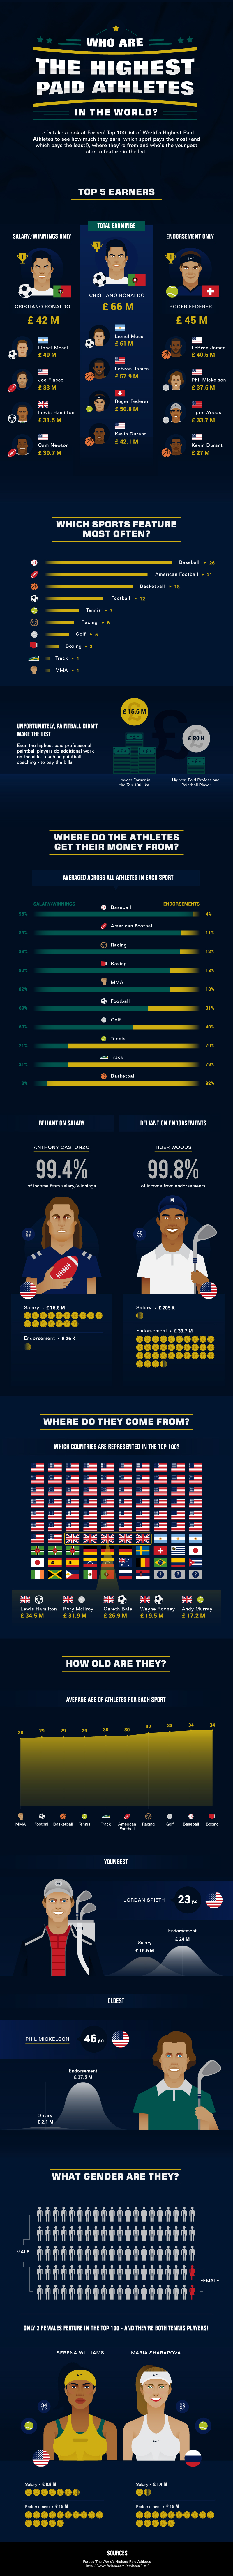 Top Sports Player Earnings Infographic